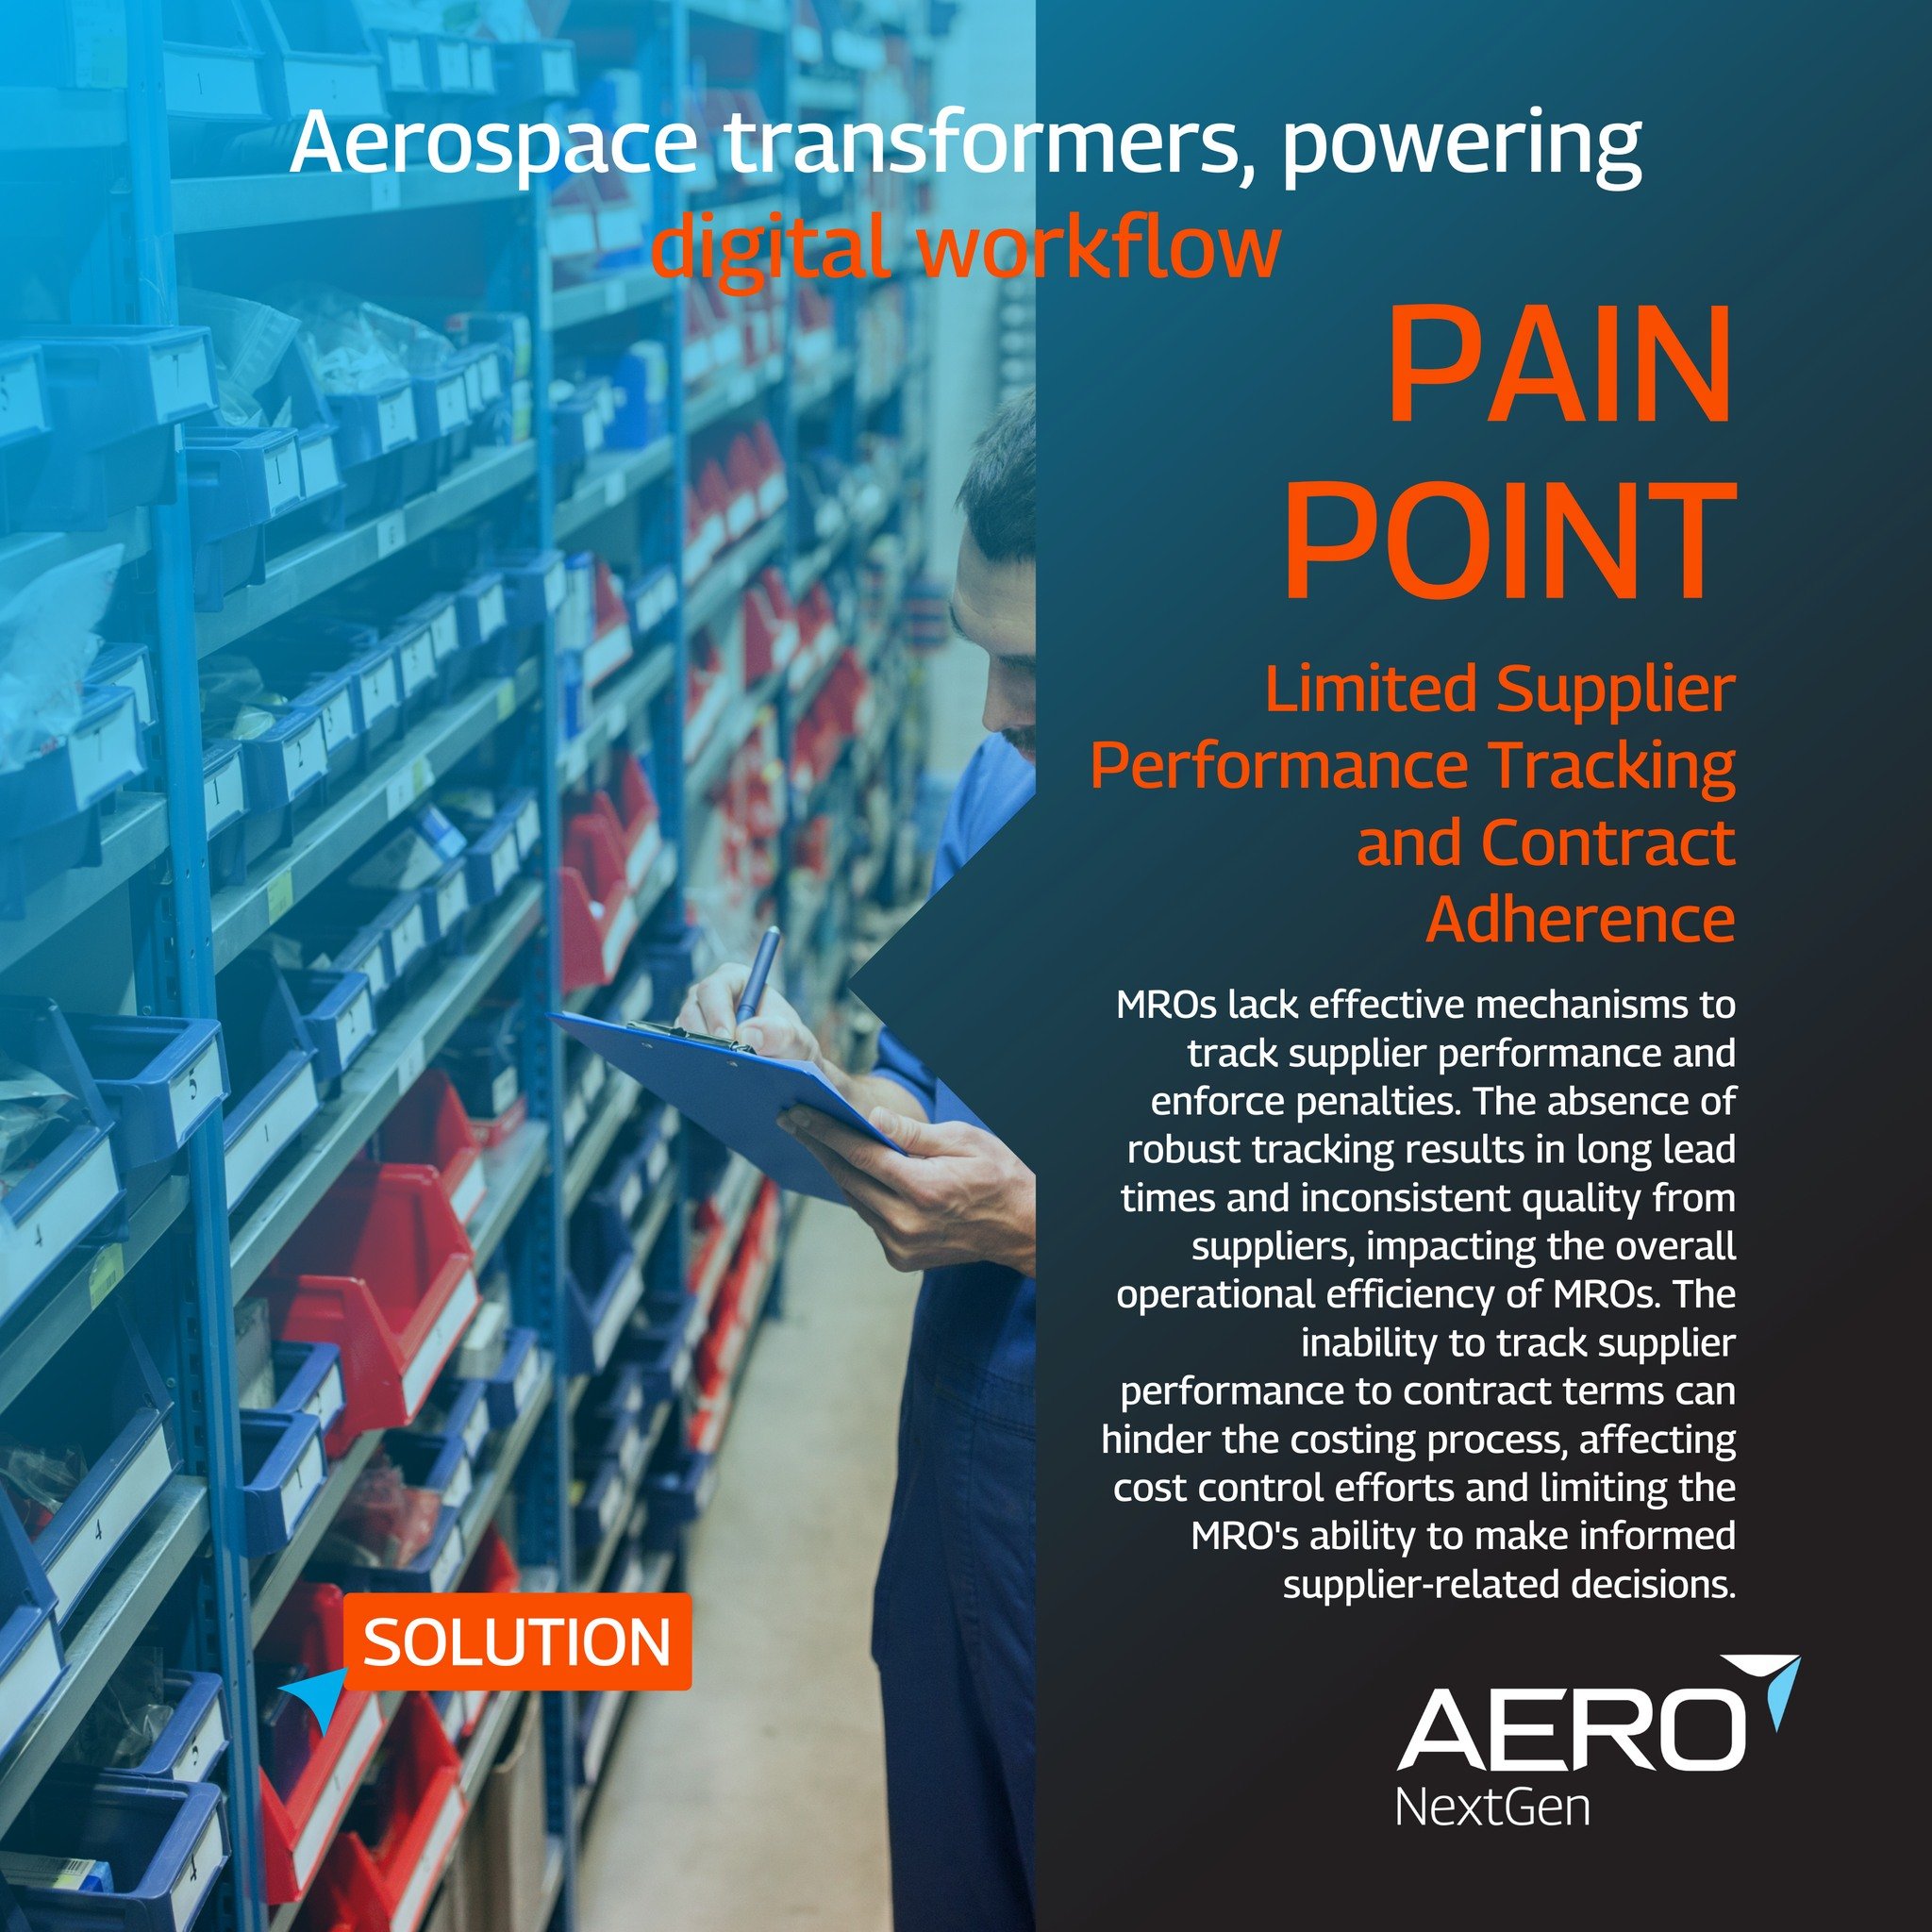 PAIN POINT ALERT | Tackling Supplier Performance and Contract Adherence in MROs 🚨

In the world of aviation MRO, effectively tracking supplier performance and ensuring contract adherence are vital to maintaining operational efficiency. Yet, many MRO